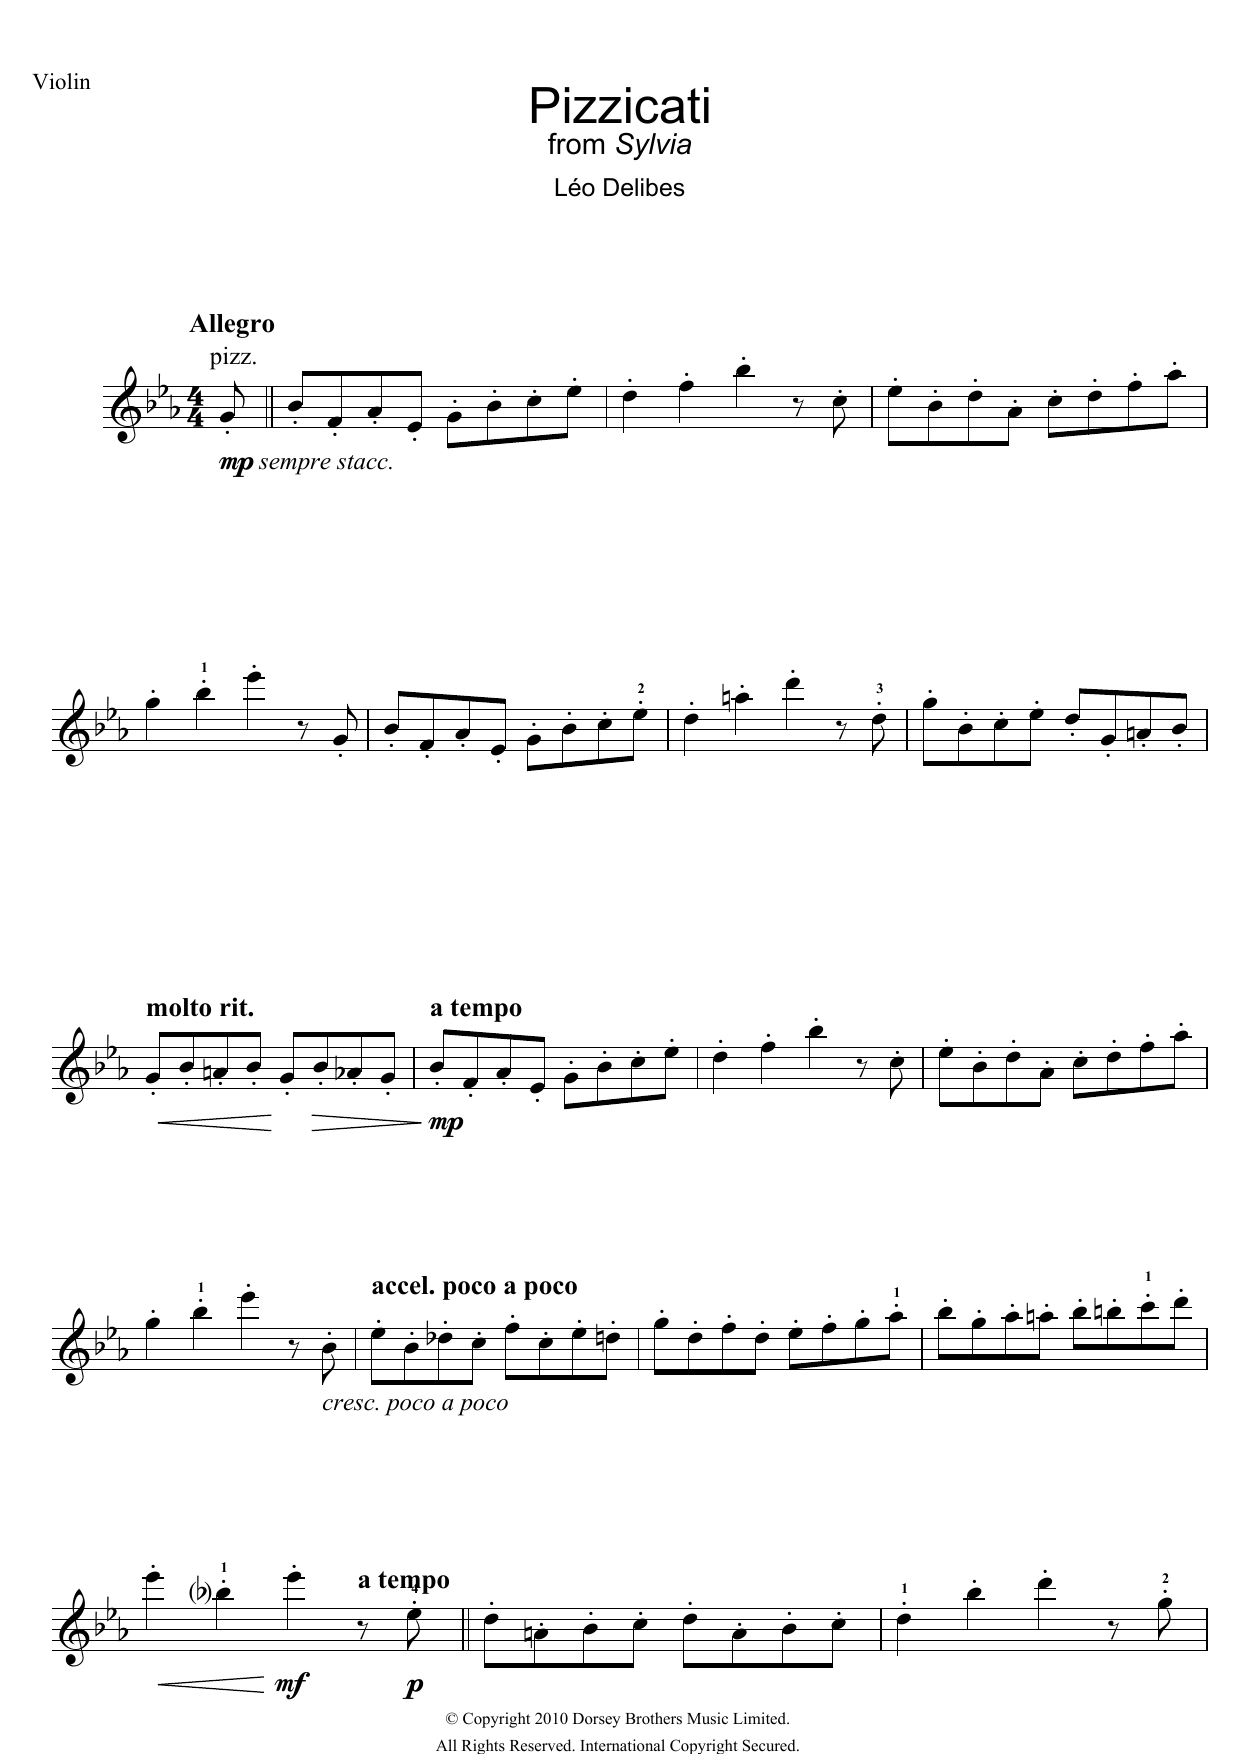 Download Leo Delibes Pizzicati (from Sylvia) Sheet Music